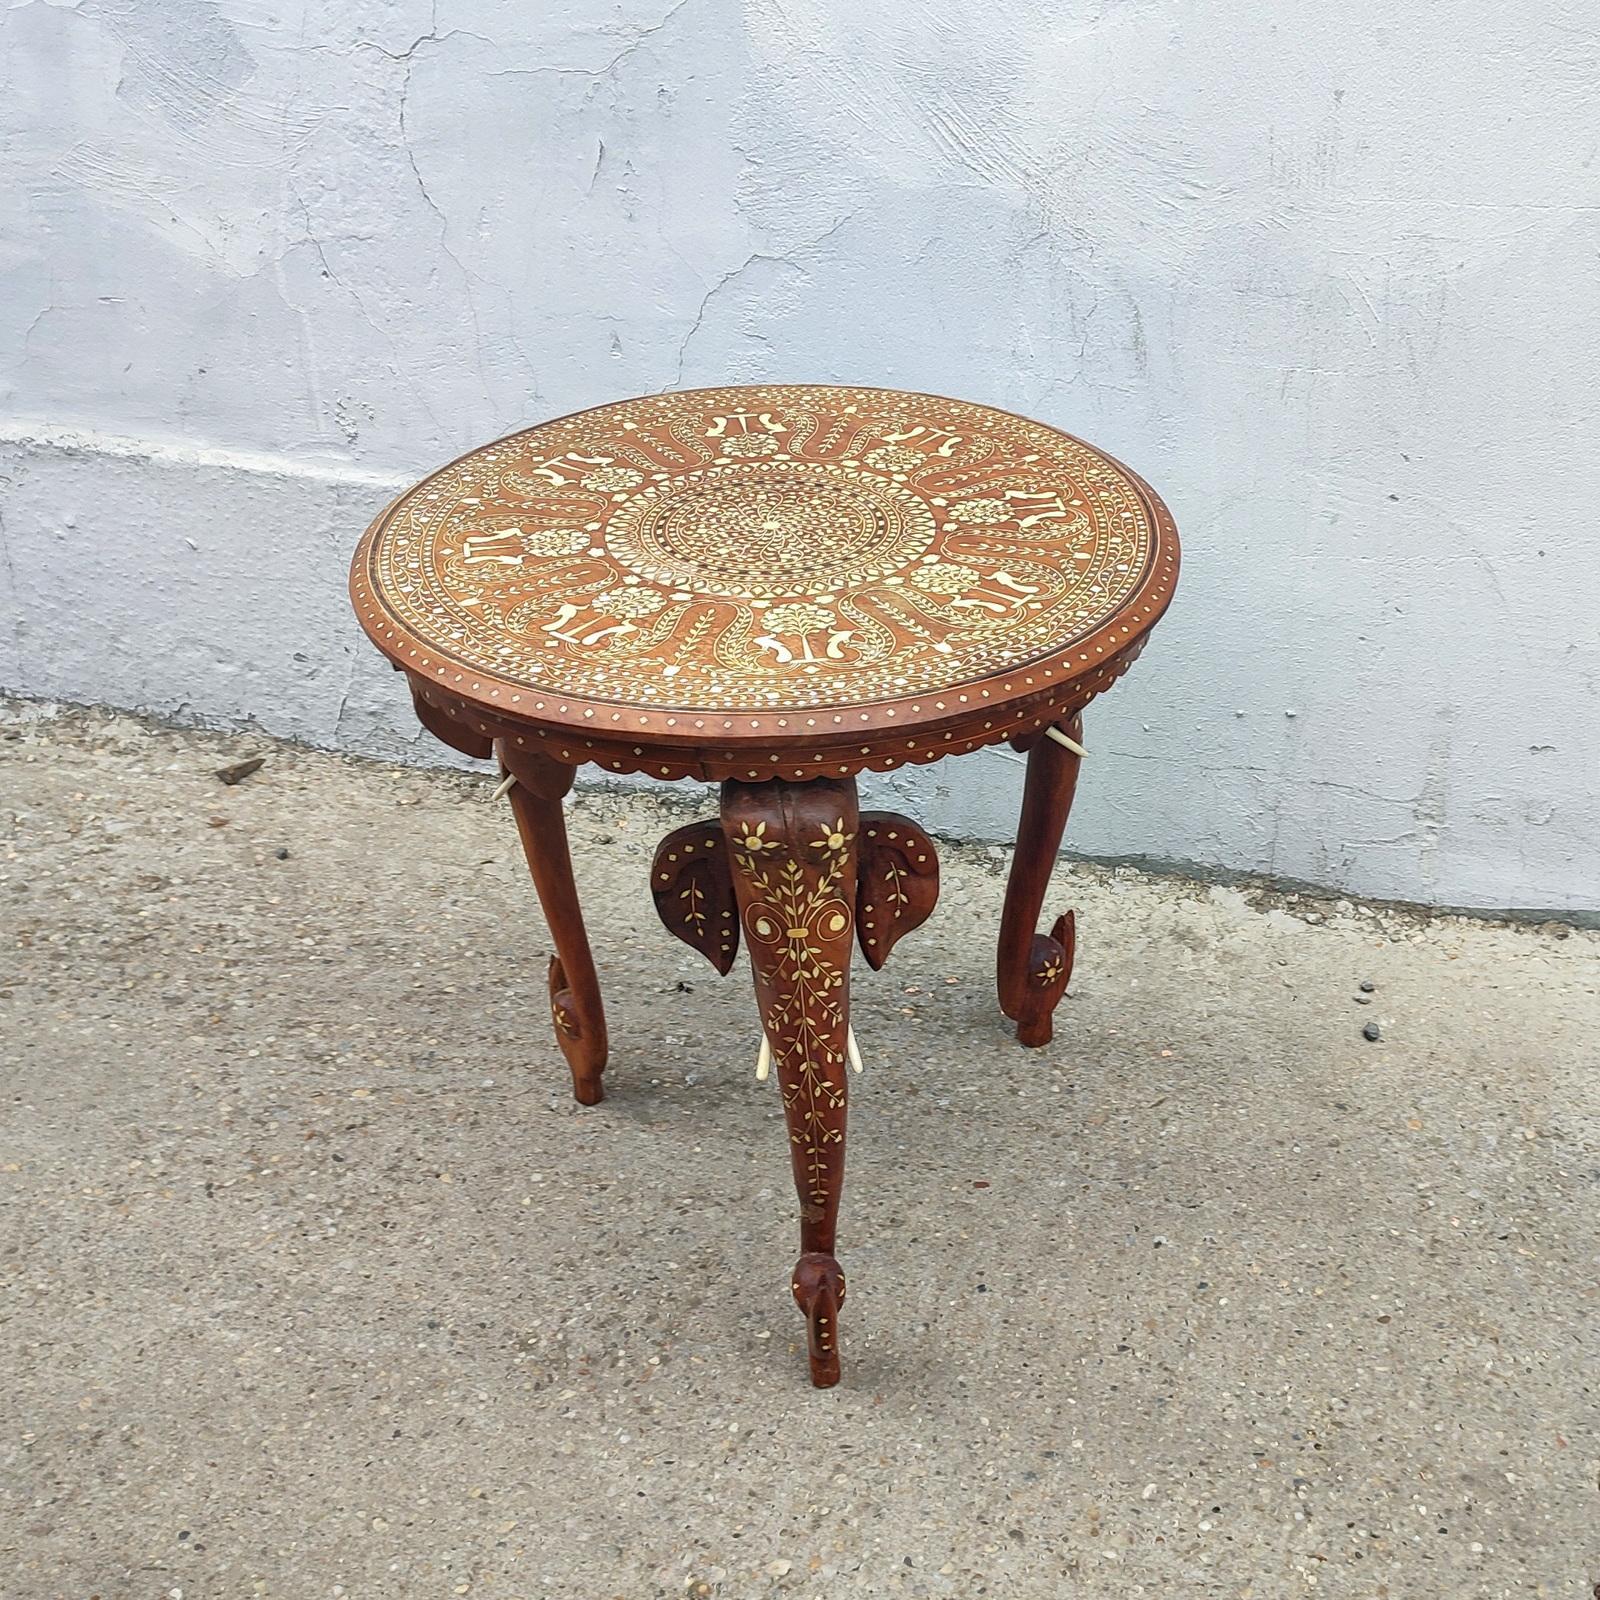 Anglo-Indian Mughal Teak Inlaid Round Side Table.
A refined and elegant round side table that is hand-carved with bone inlaid and has an elaborate peacock and tree design.
With bone inlaid figurative details, resting on the three supporting legs,